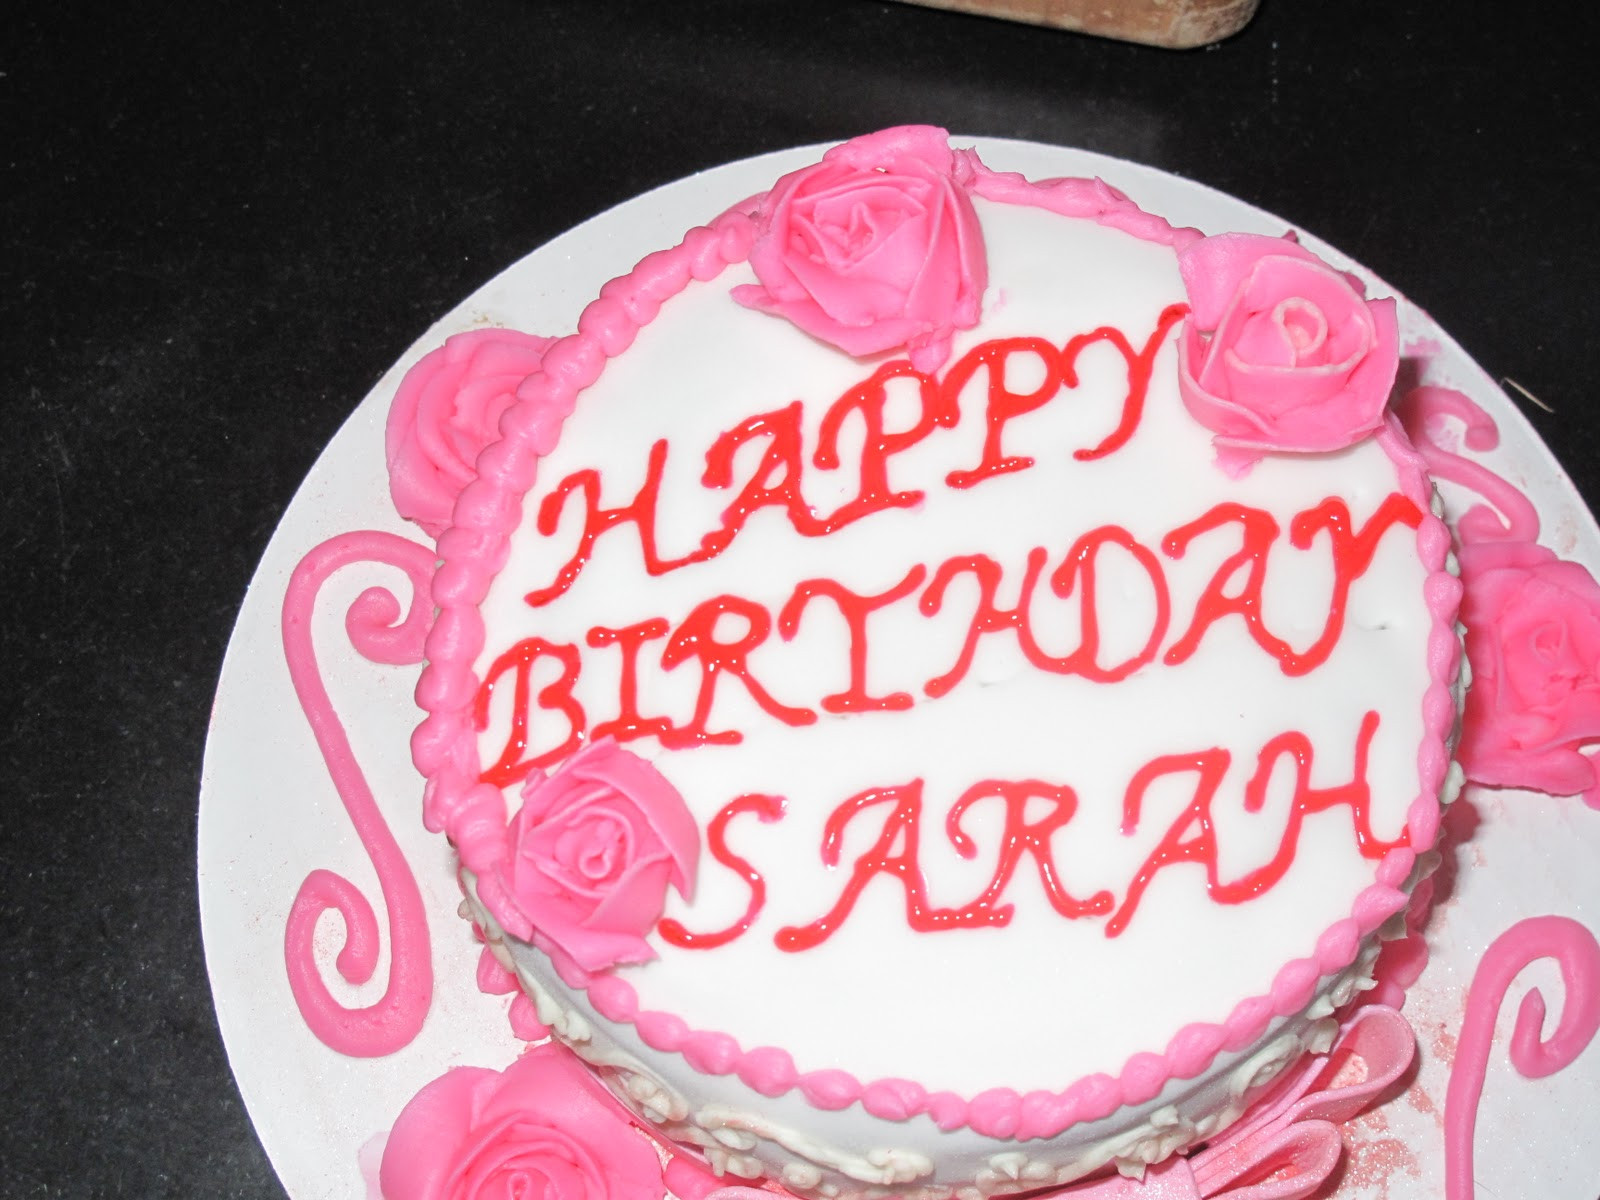 Happy Birthday Sarah Cake
 Confections A Teenage Chef Happy Birthday Sarah